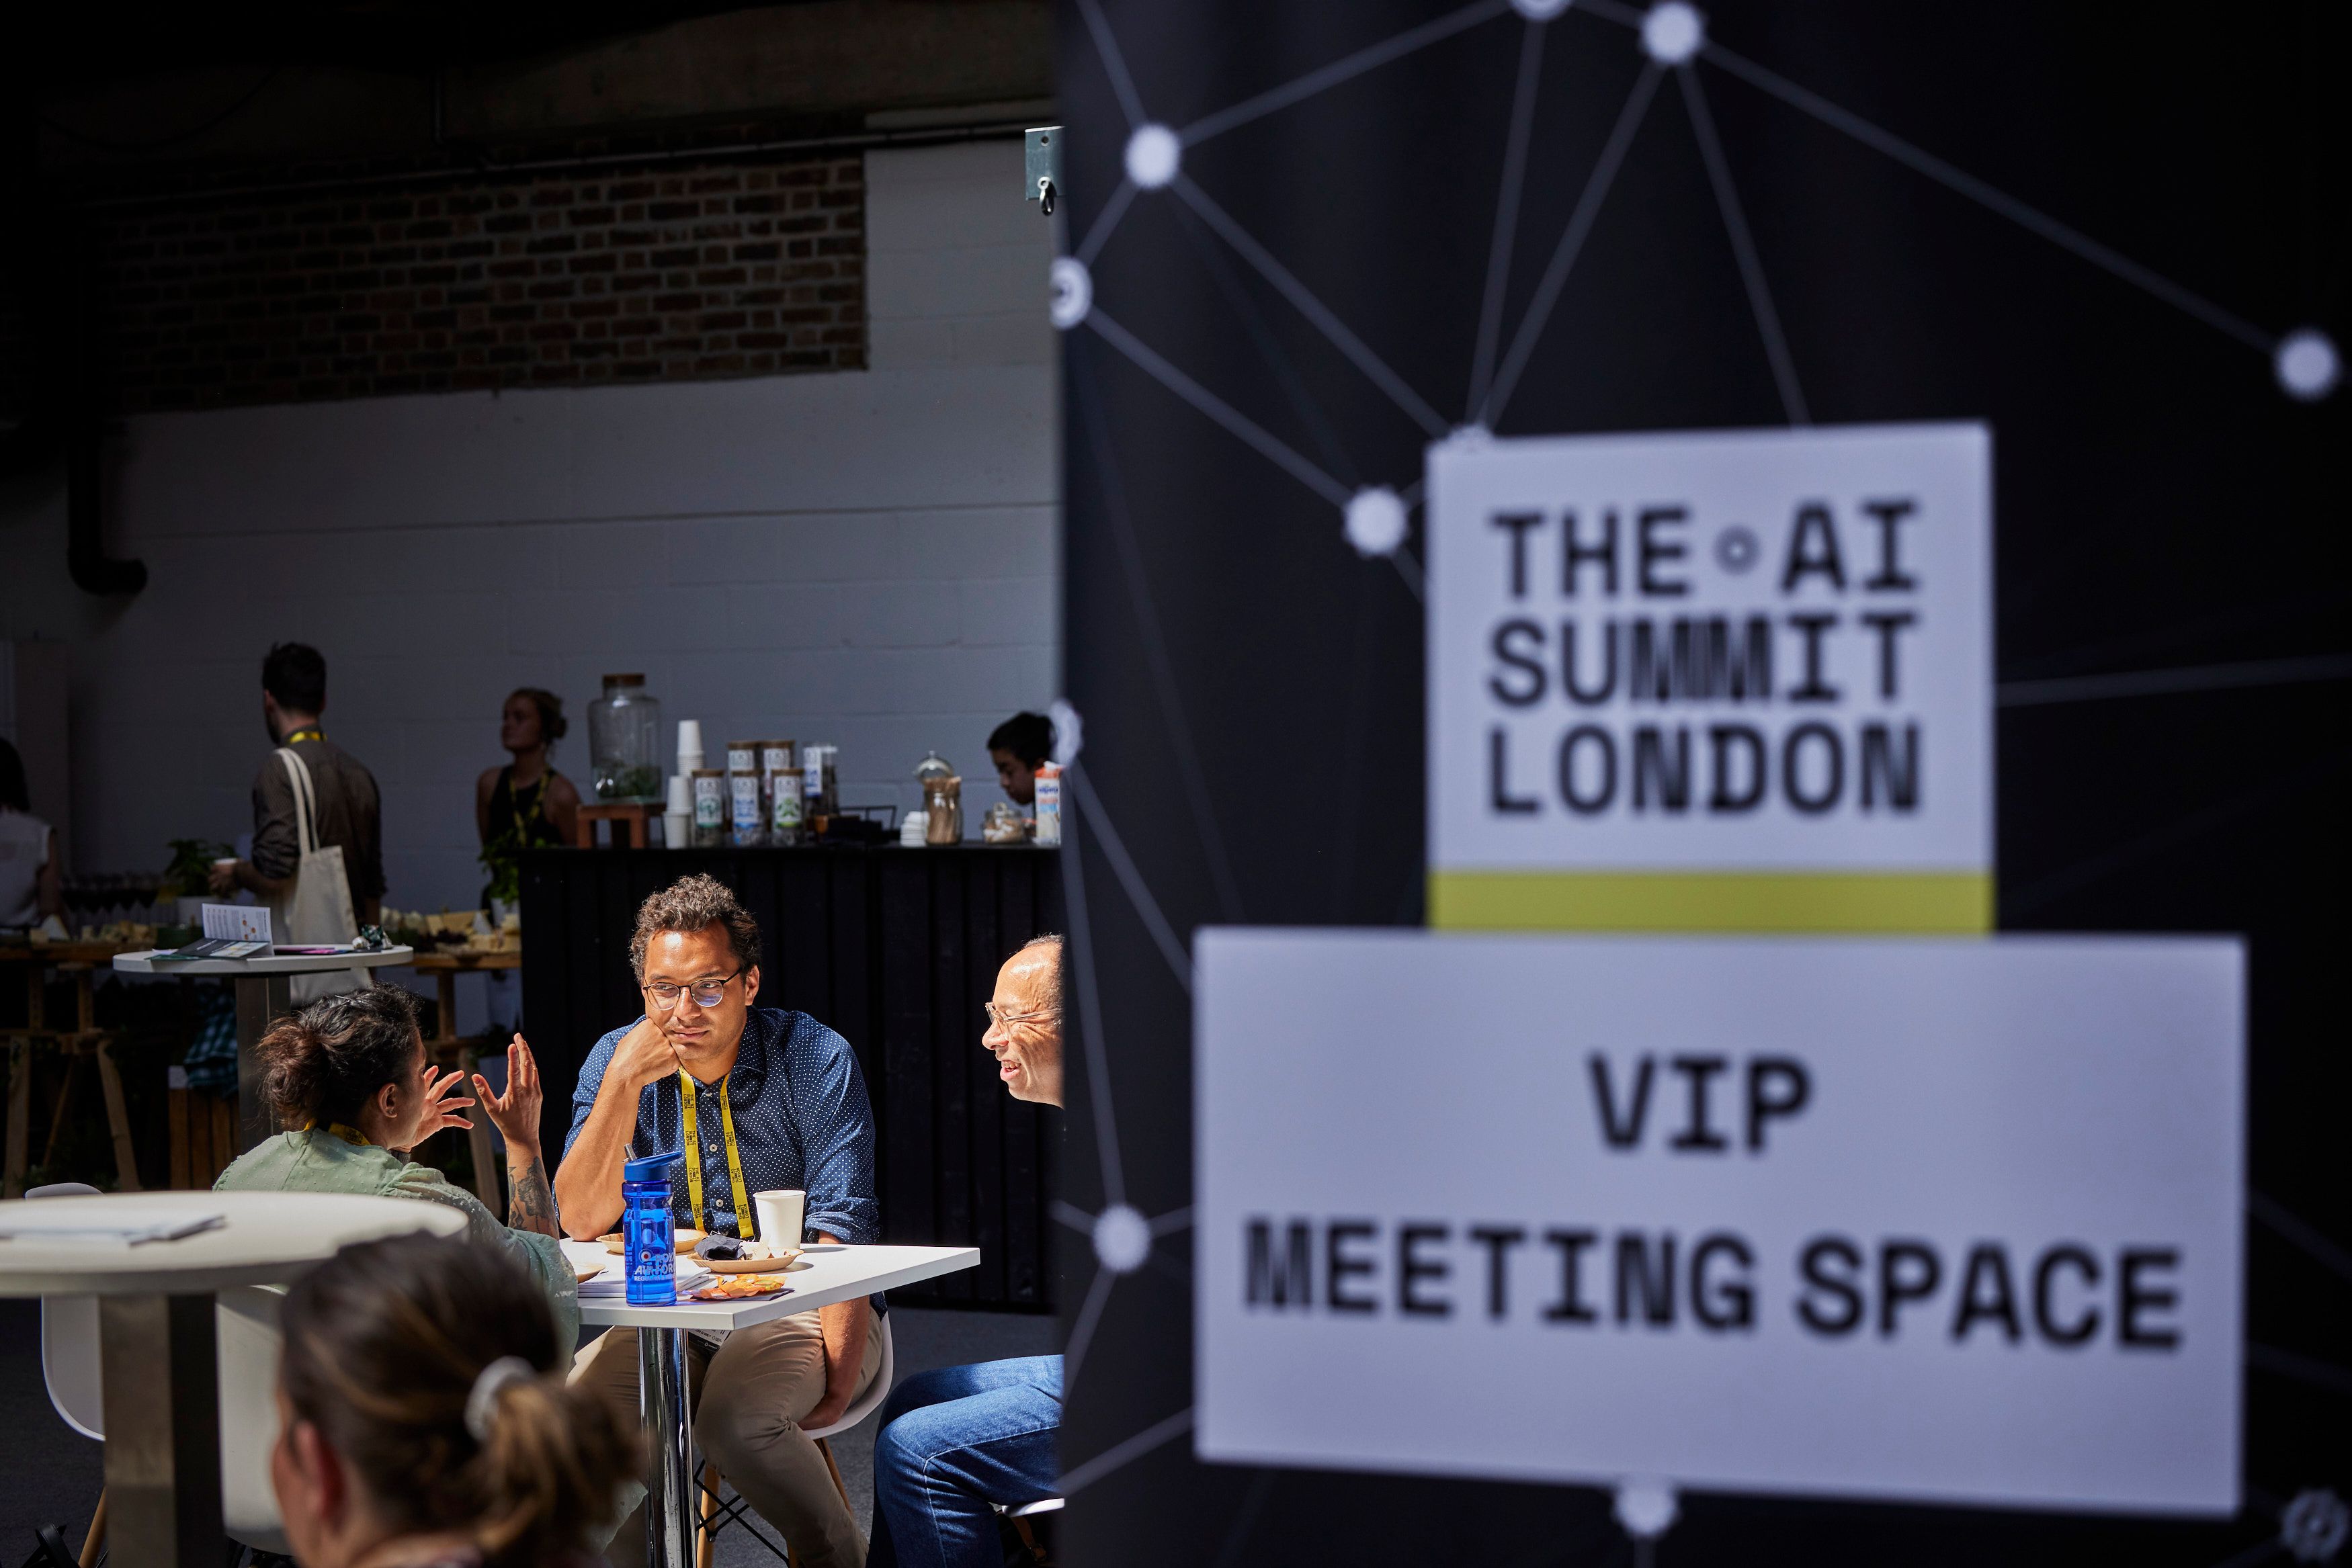 The AI Summit London - VisionAIres VIP networking